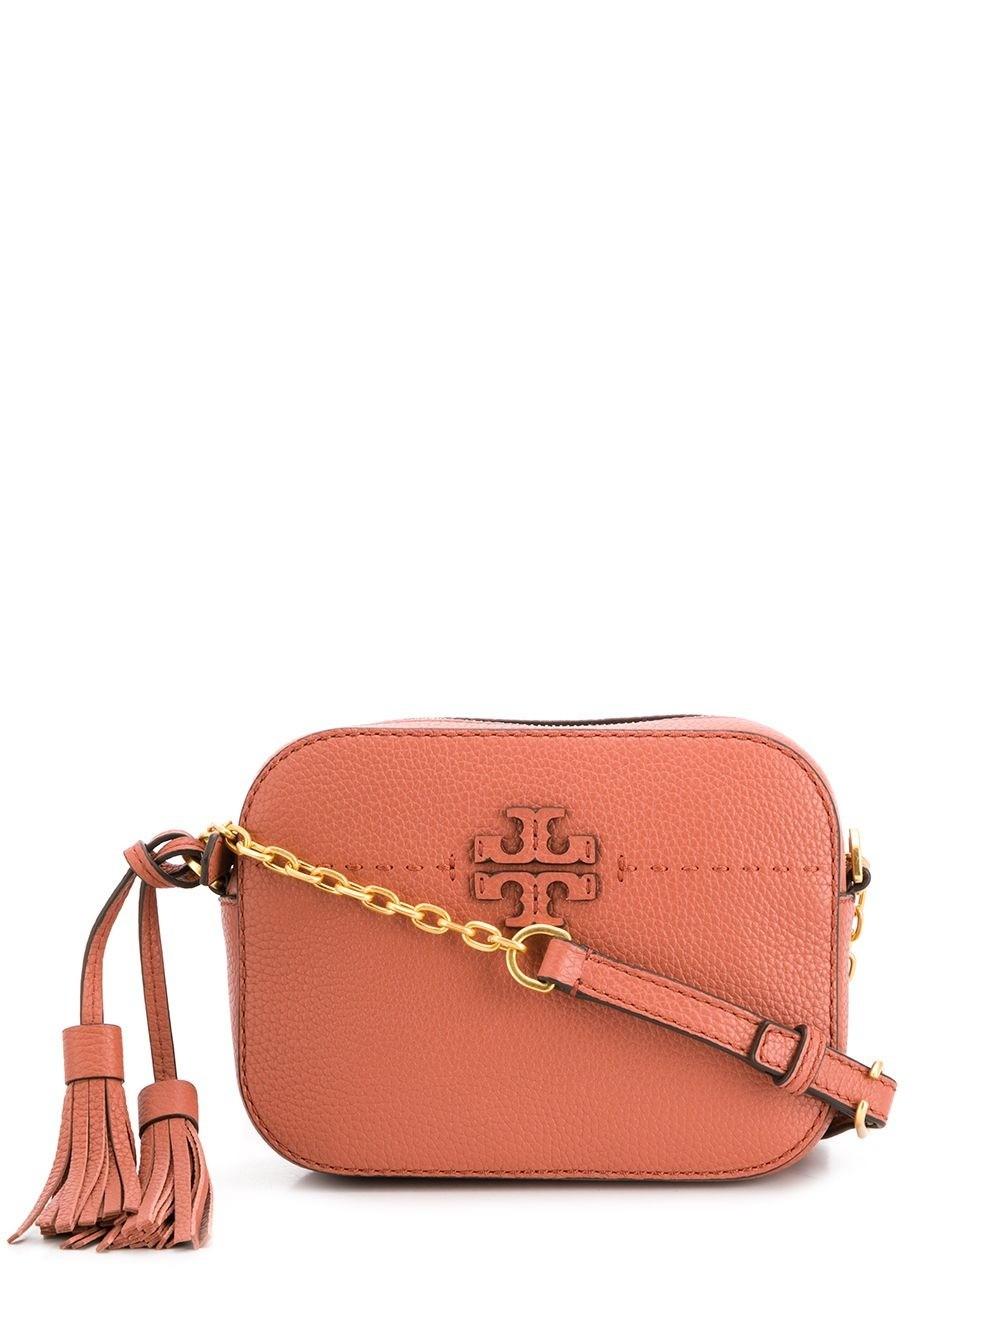 Tory Burch Leather Mcgraw Crossbody Bag in Pink - Lyst